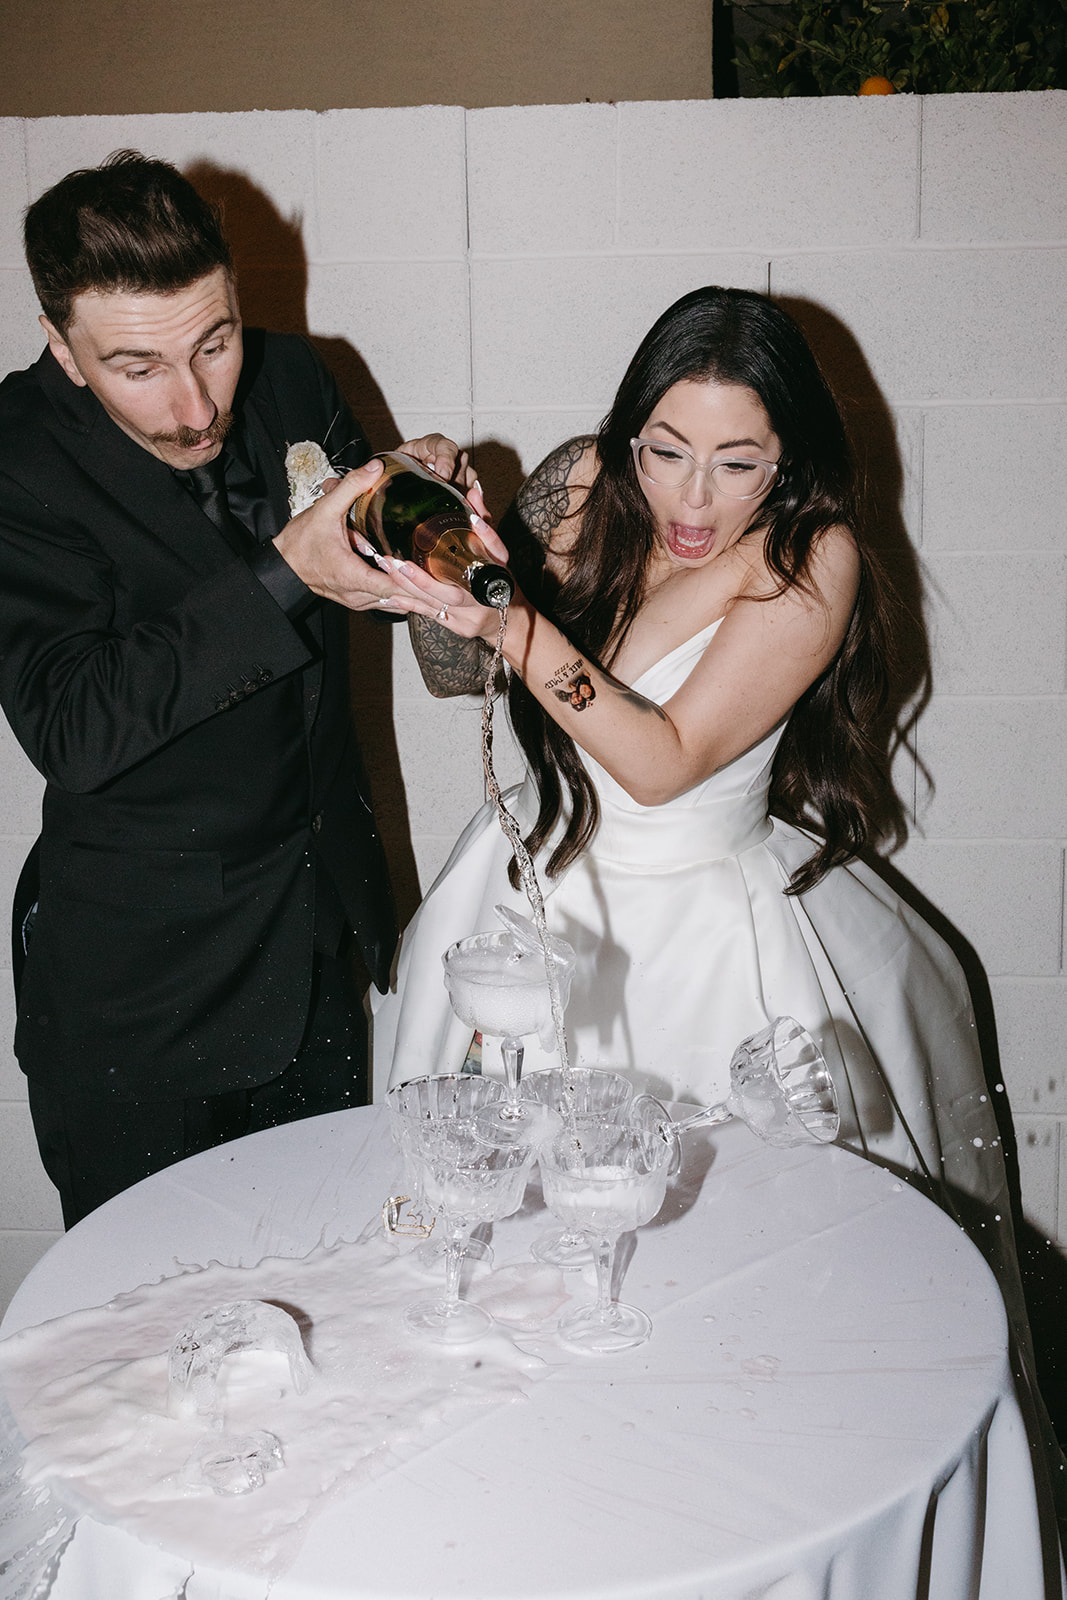 Couple spilling and pouring Champagne in Champagne glass tower during their fun backyard reception dinner 